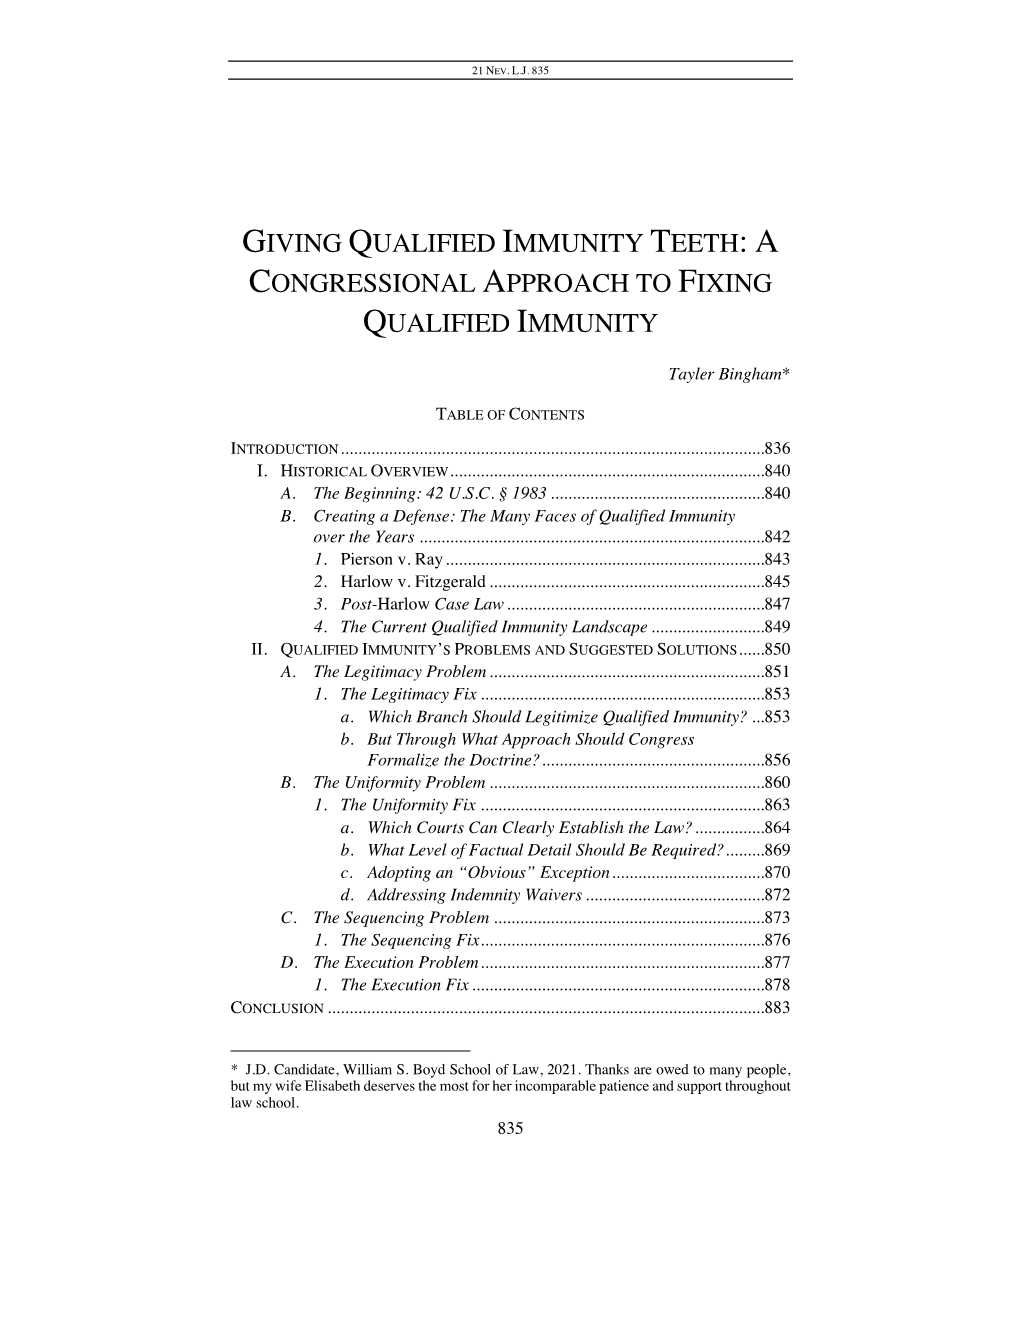 A Congressional Approach Tofixing Qualified Immunity